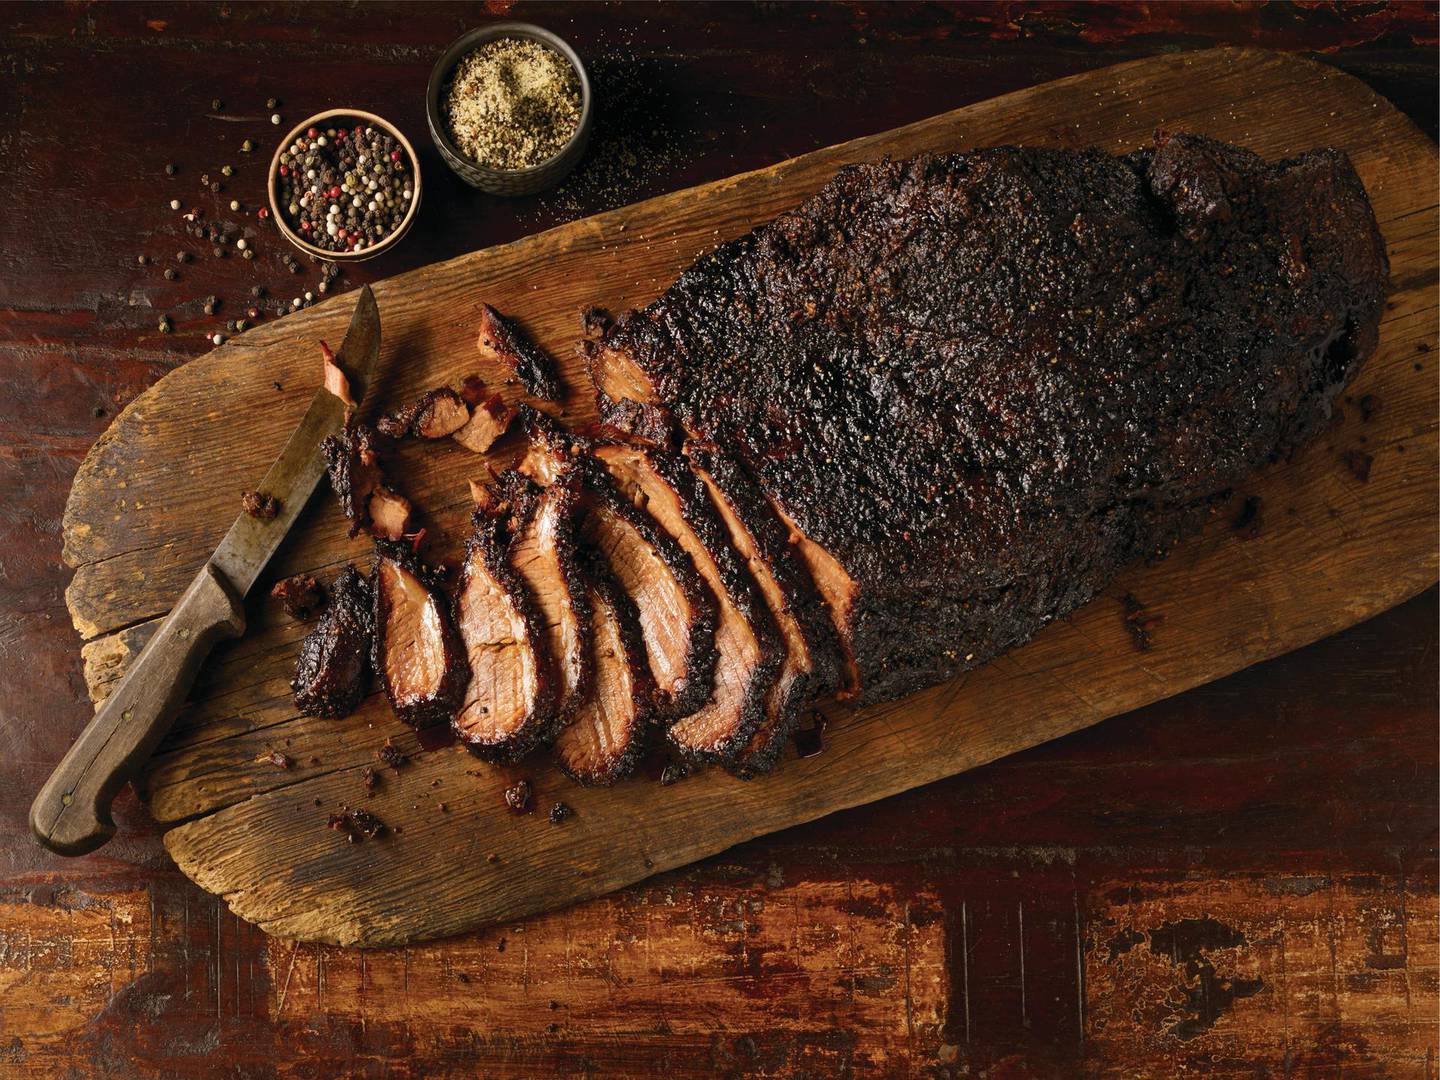 Beef brisket slow-smoked in a hickory wood pit